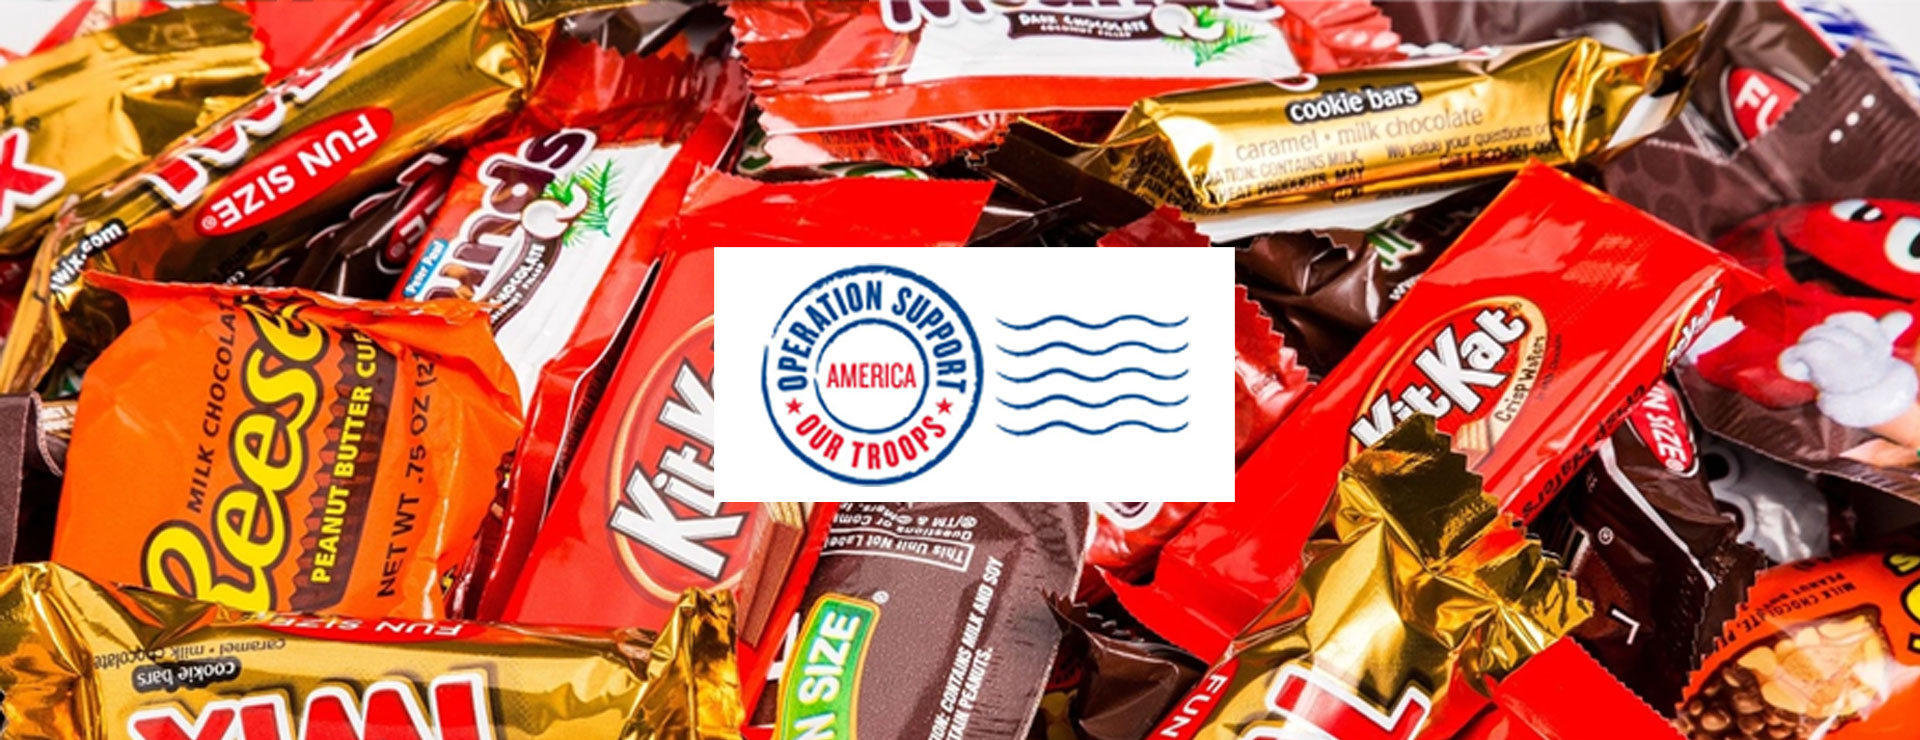 Halloween Candy for the Troops - Operation Support Our Troops